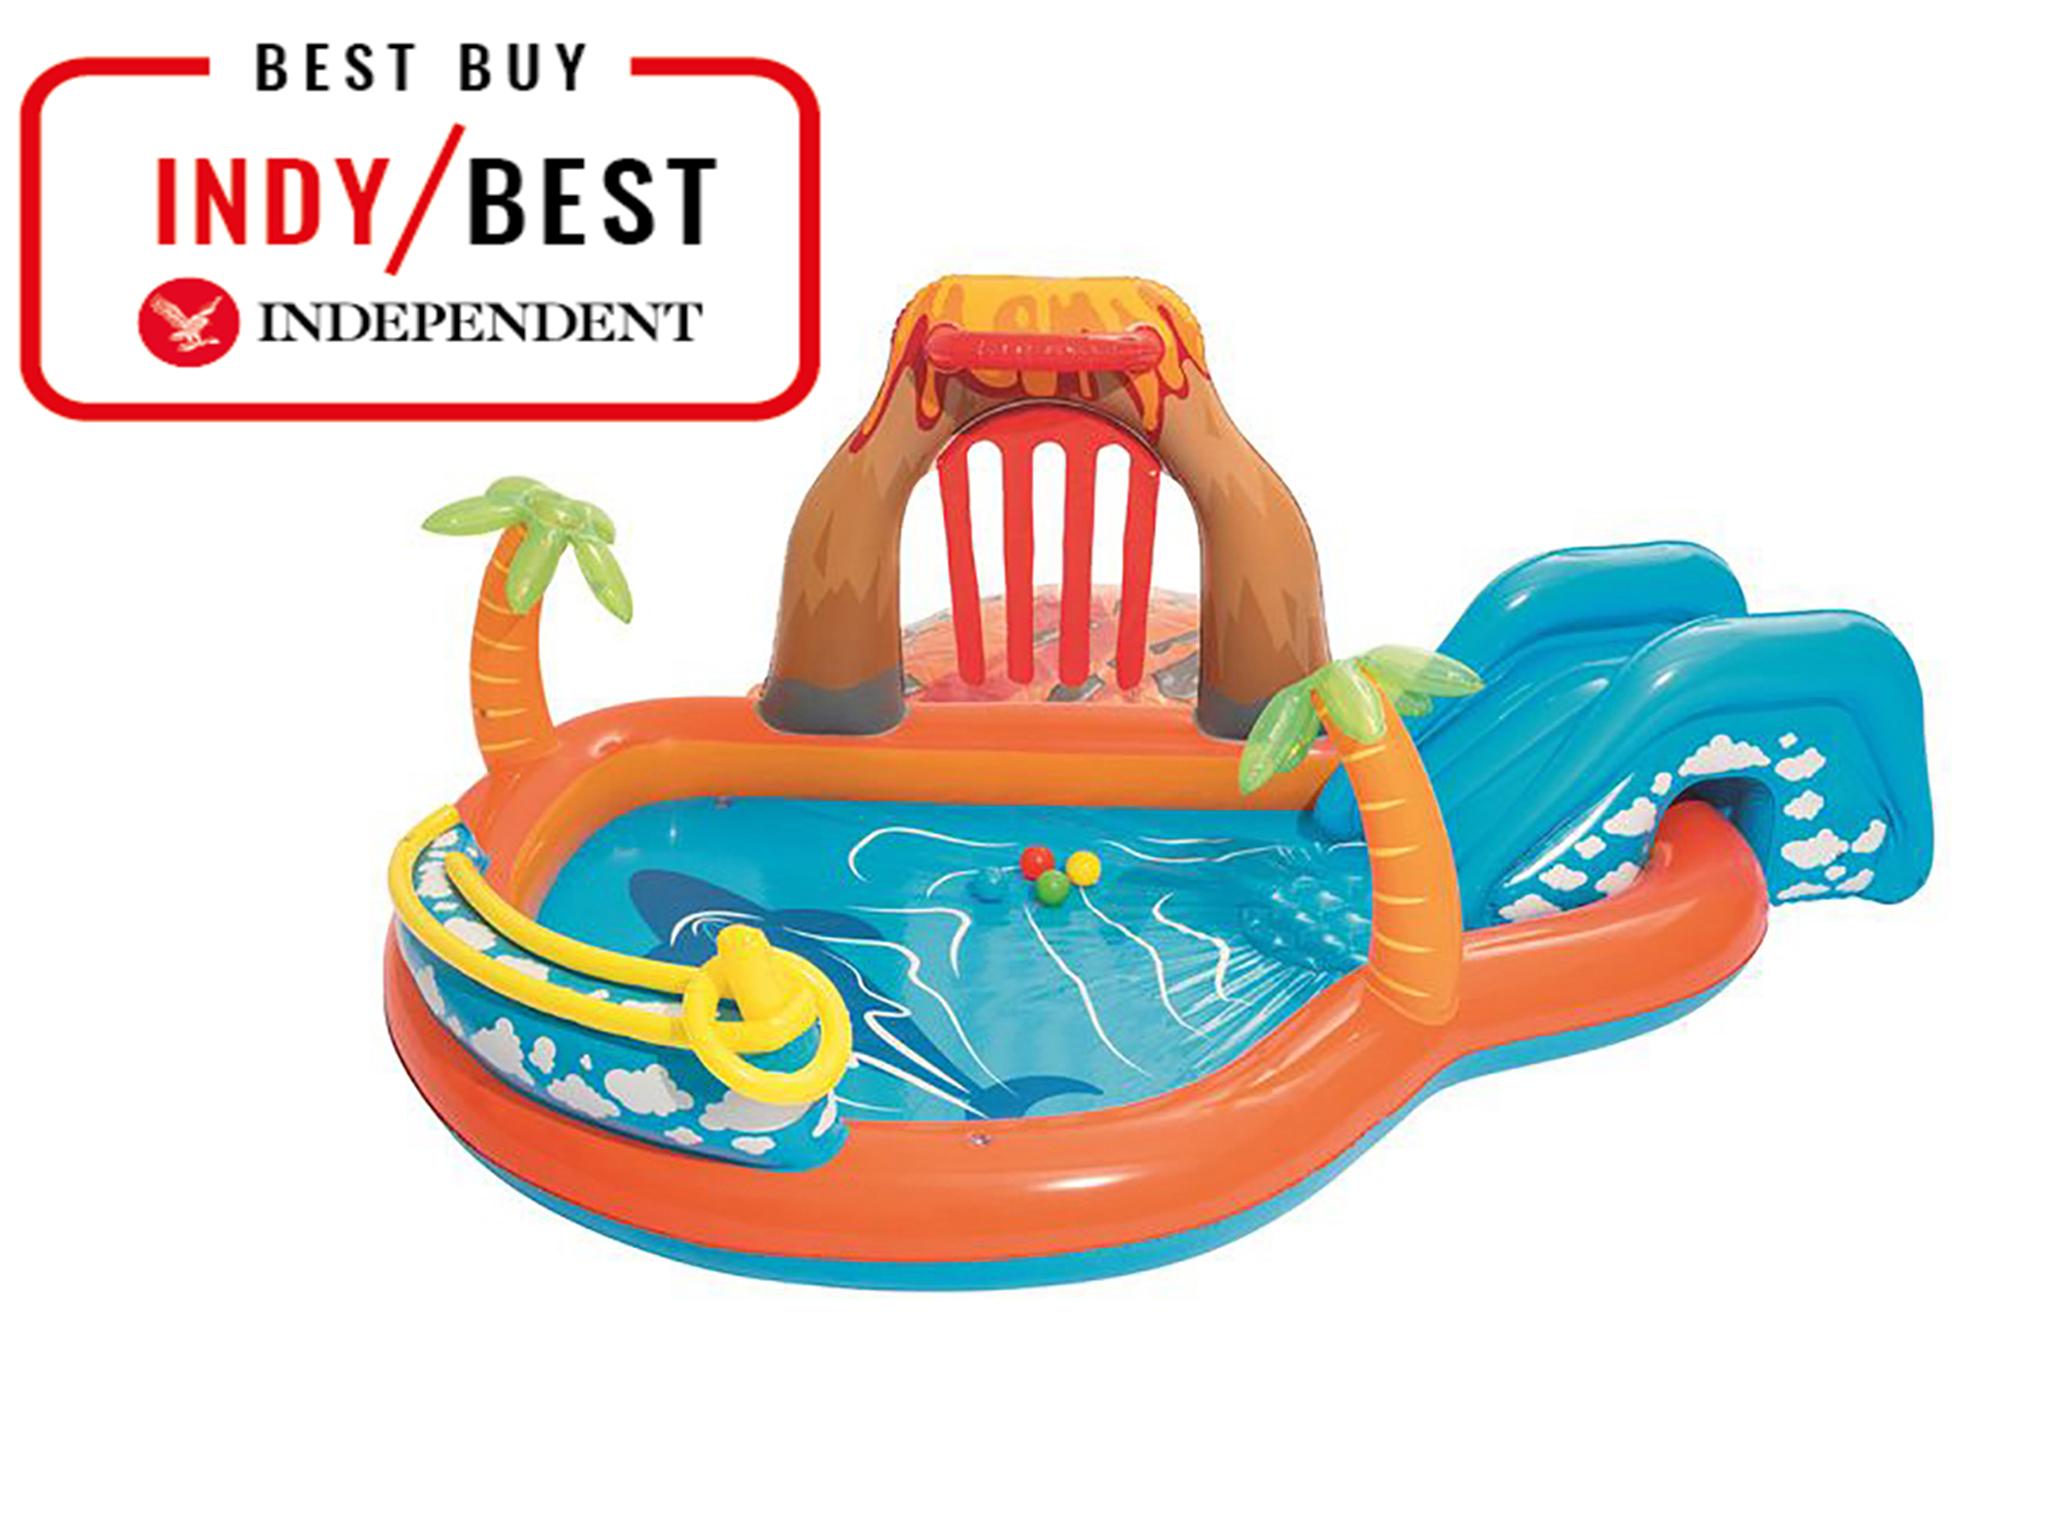 Keep kids entertained with this blow-up paddling pool (The Independent)